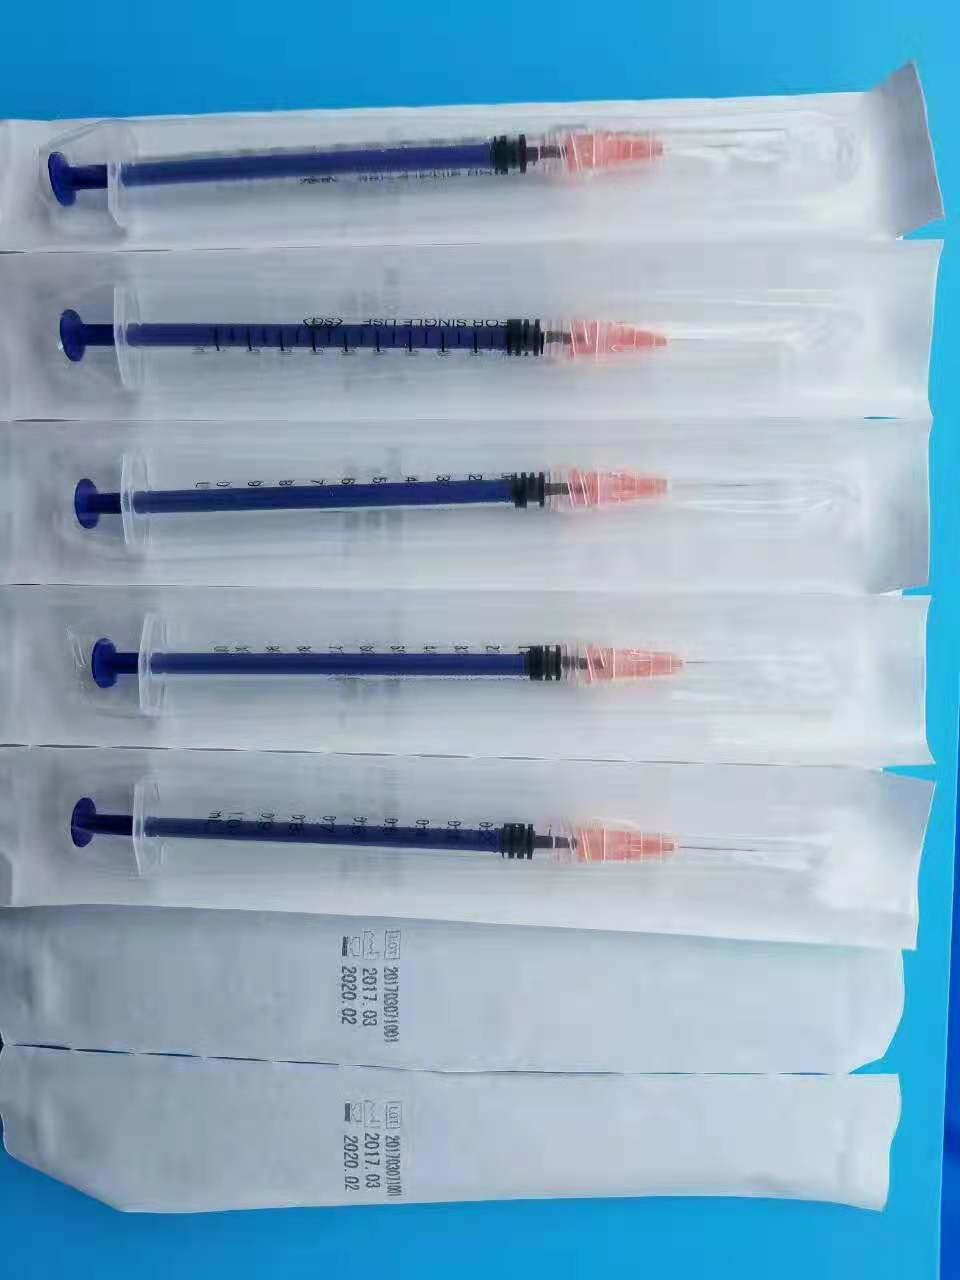 CE Edge Medical Disposable Syringes with Needles